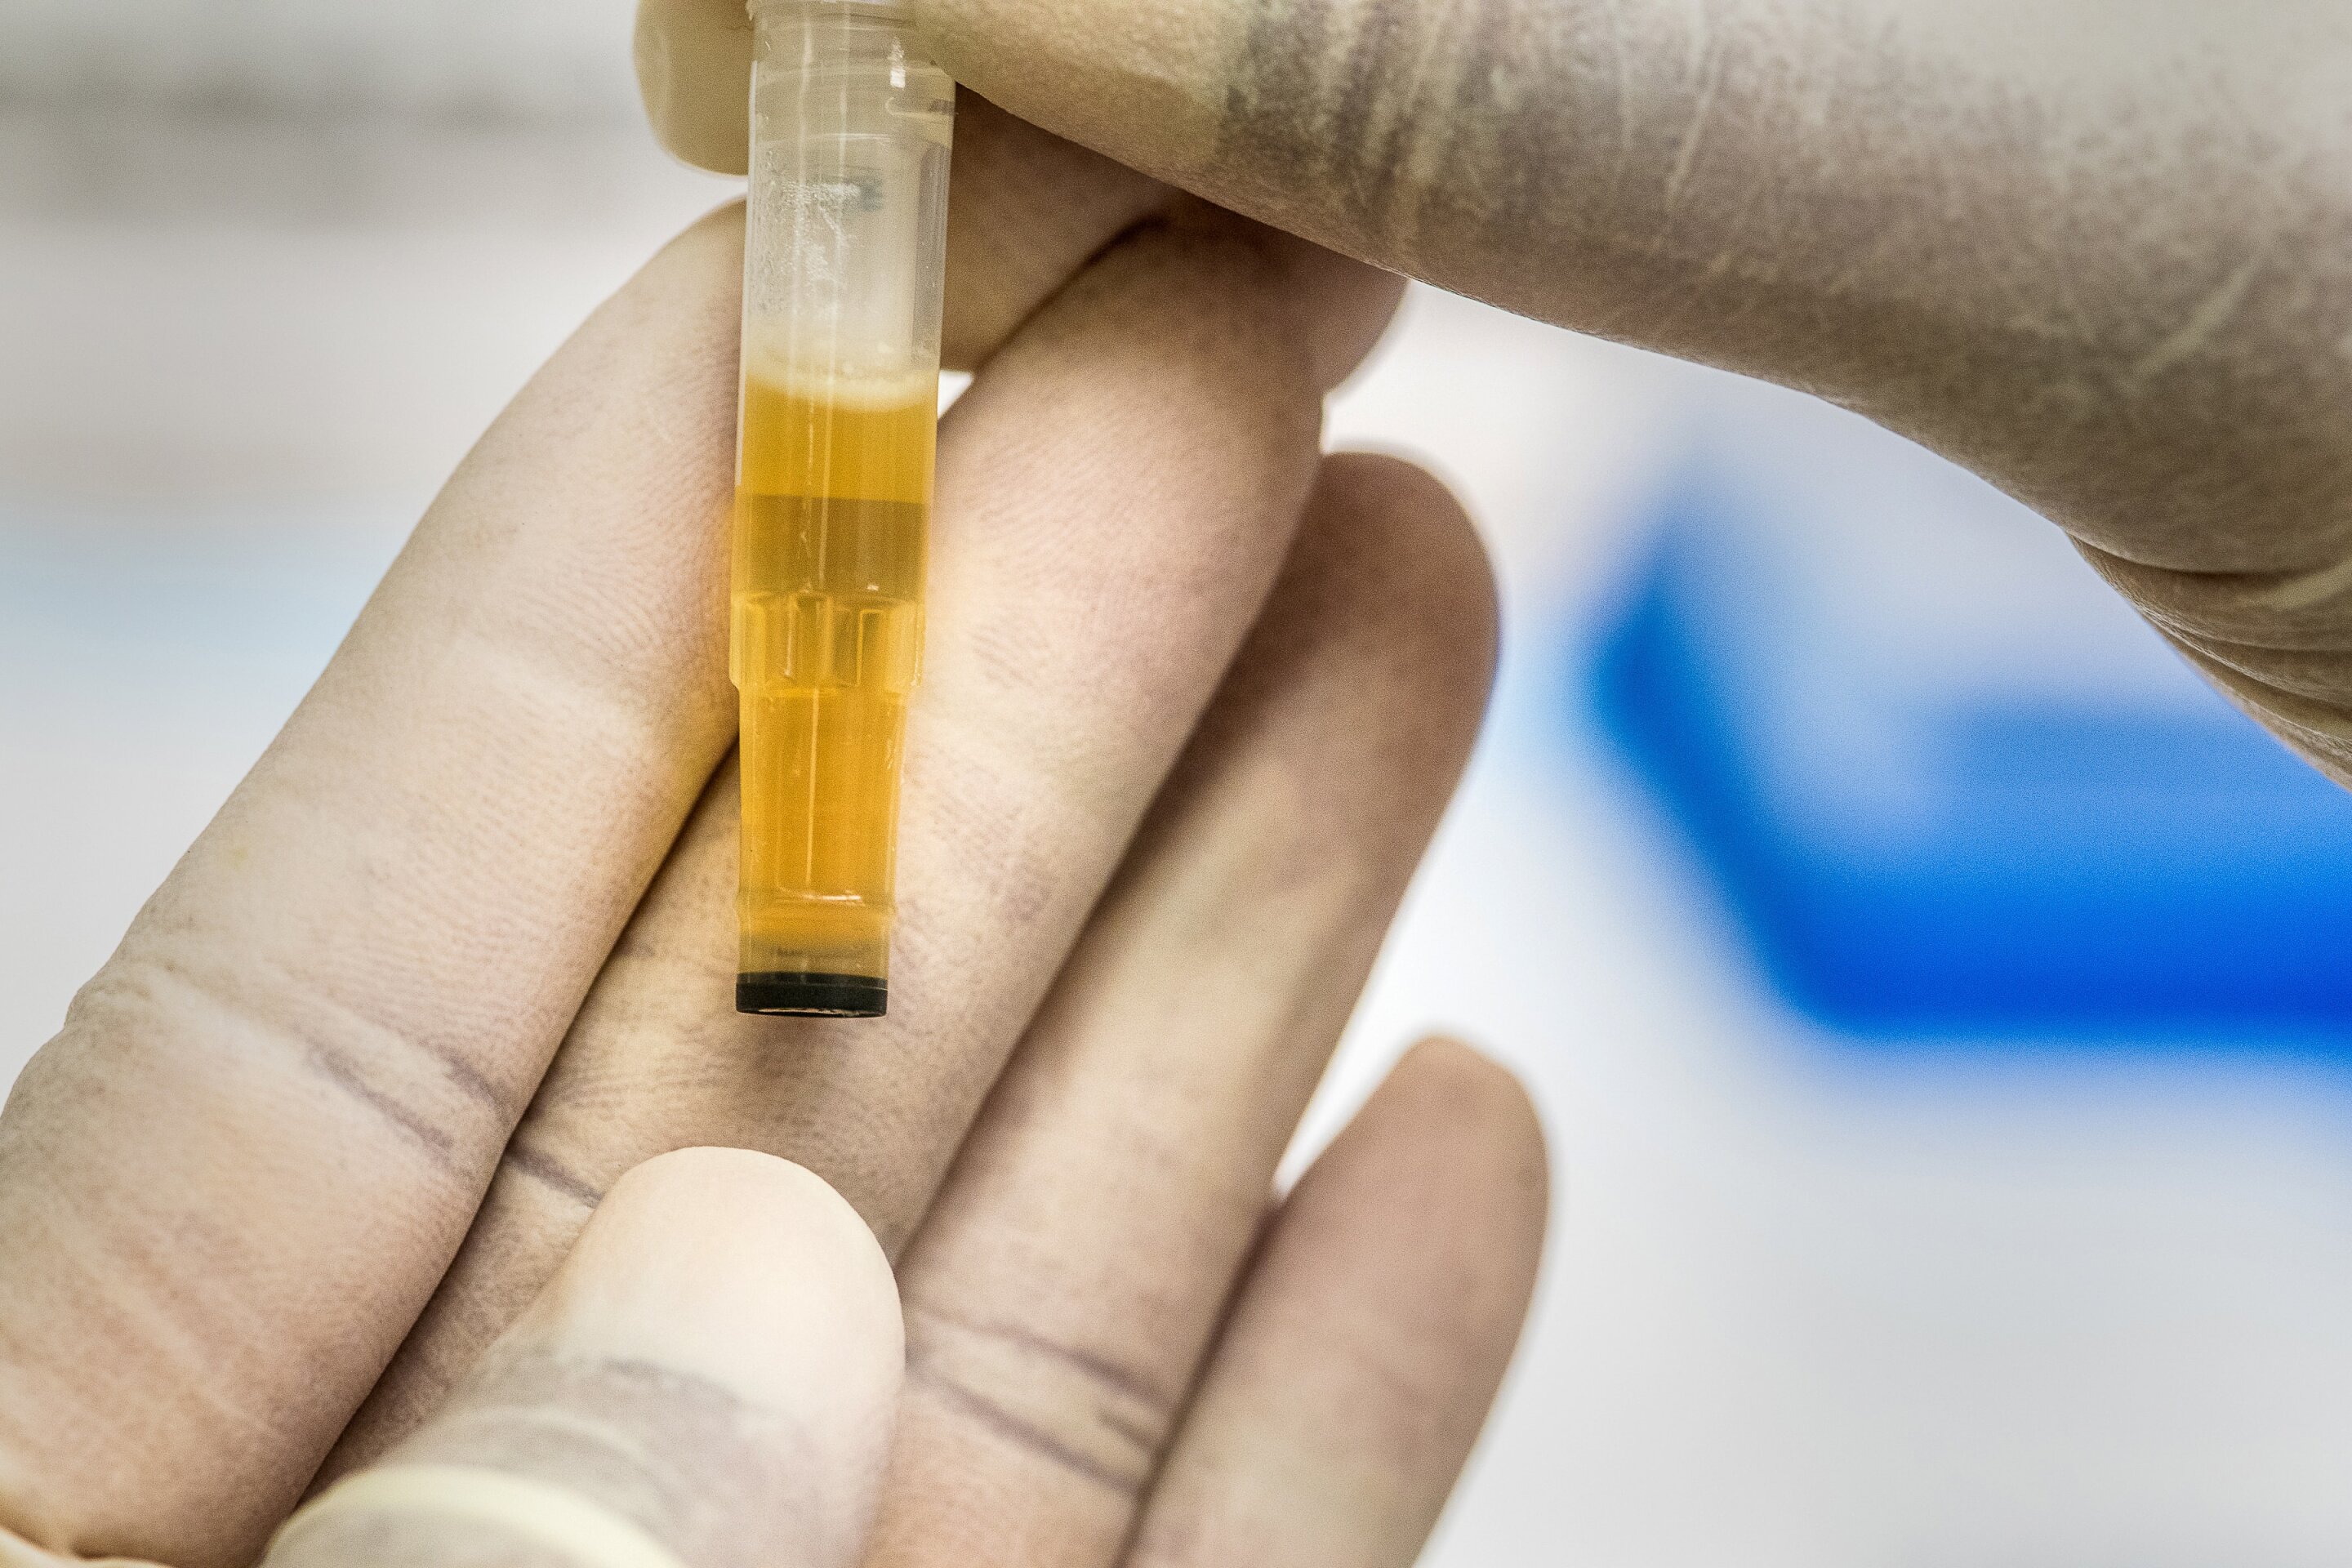 Biomarker in urine could be the first to reveal early-stage Alzheimer’s disease